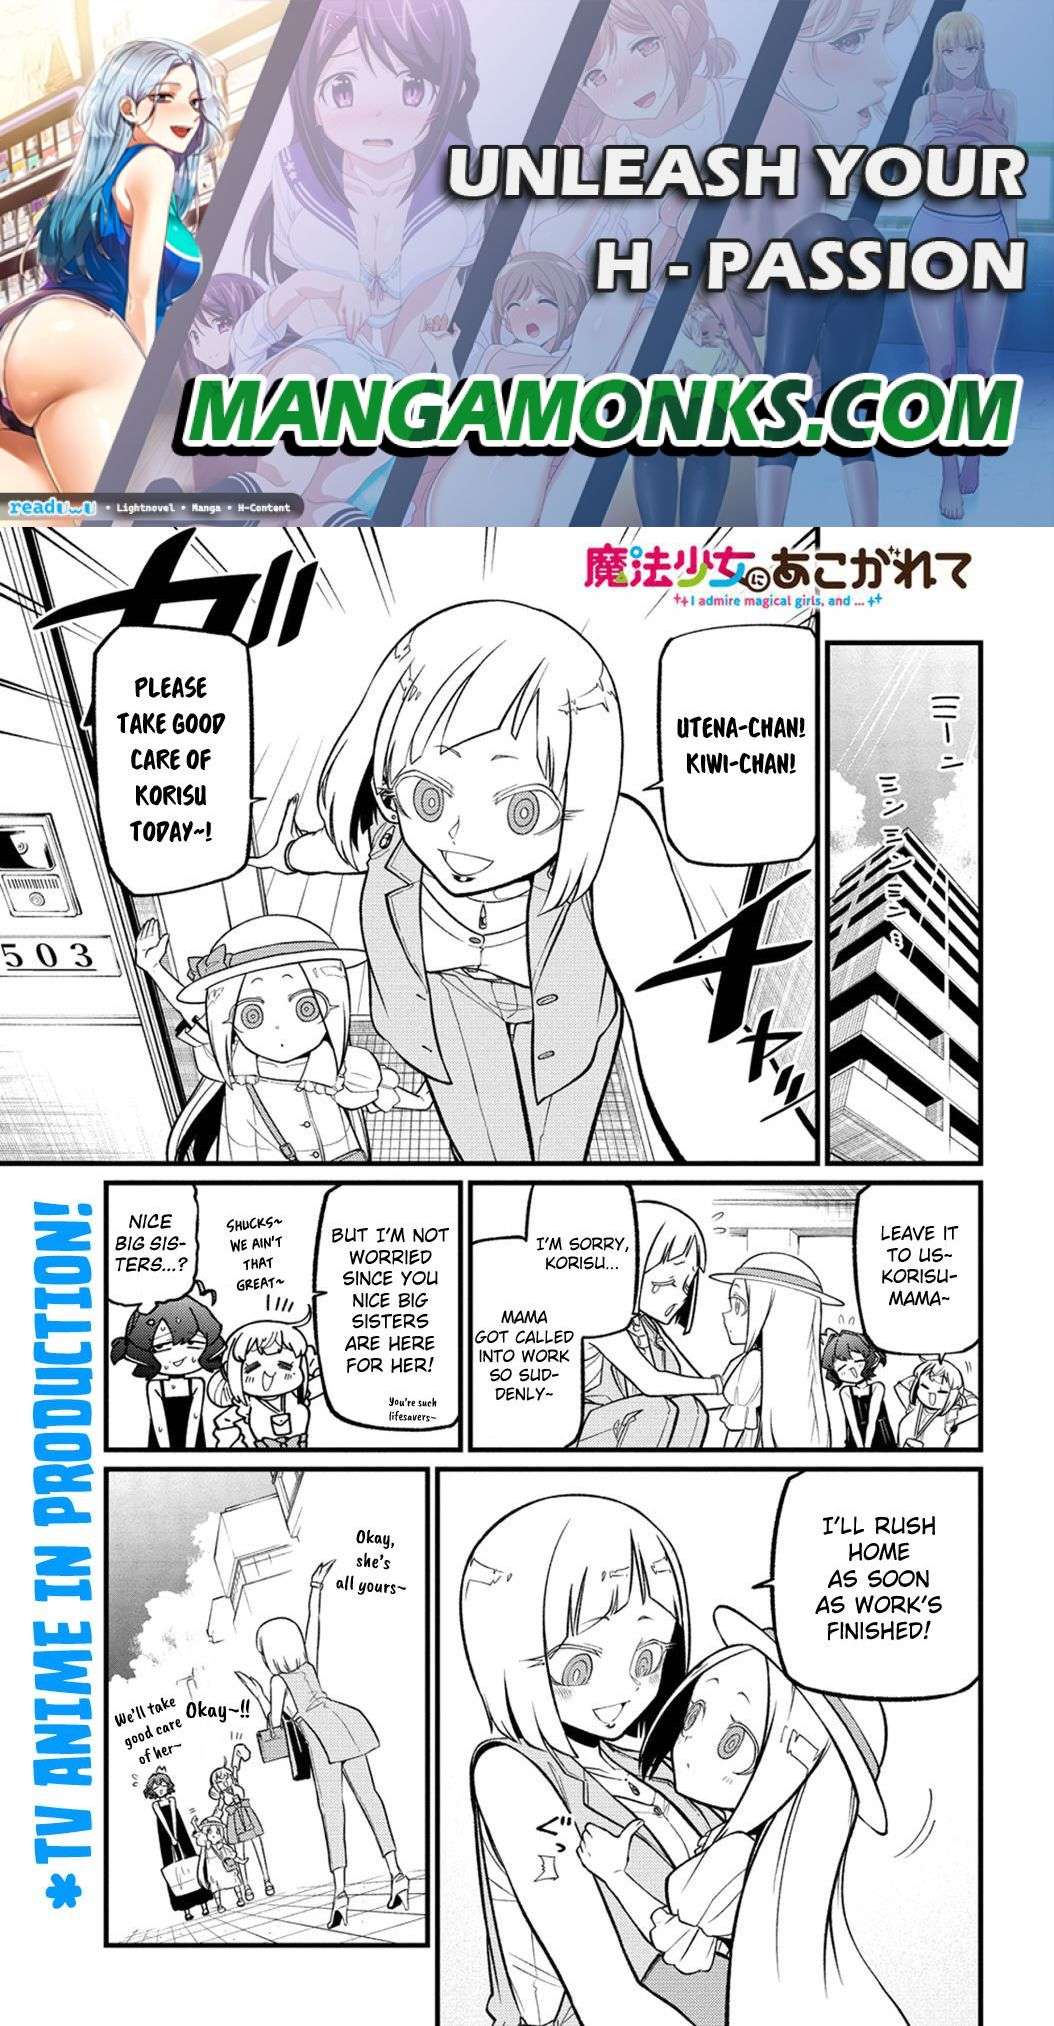 Gushing over Magical Girls - chapter 49 - #1